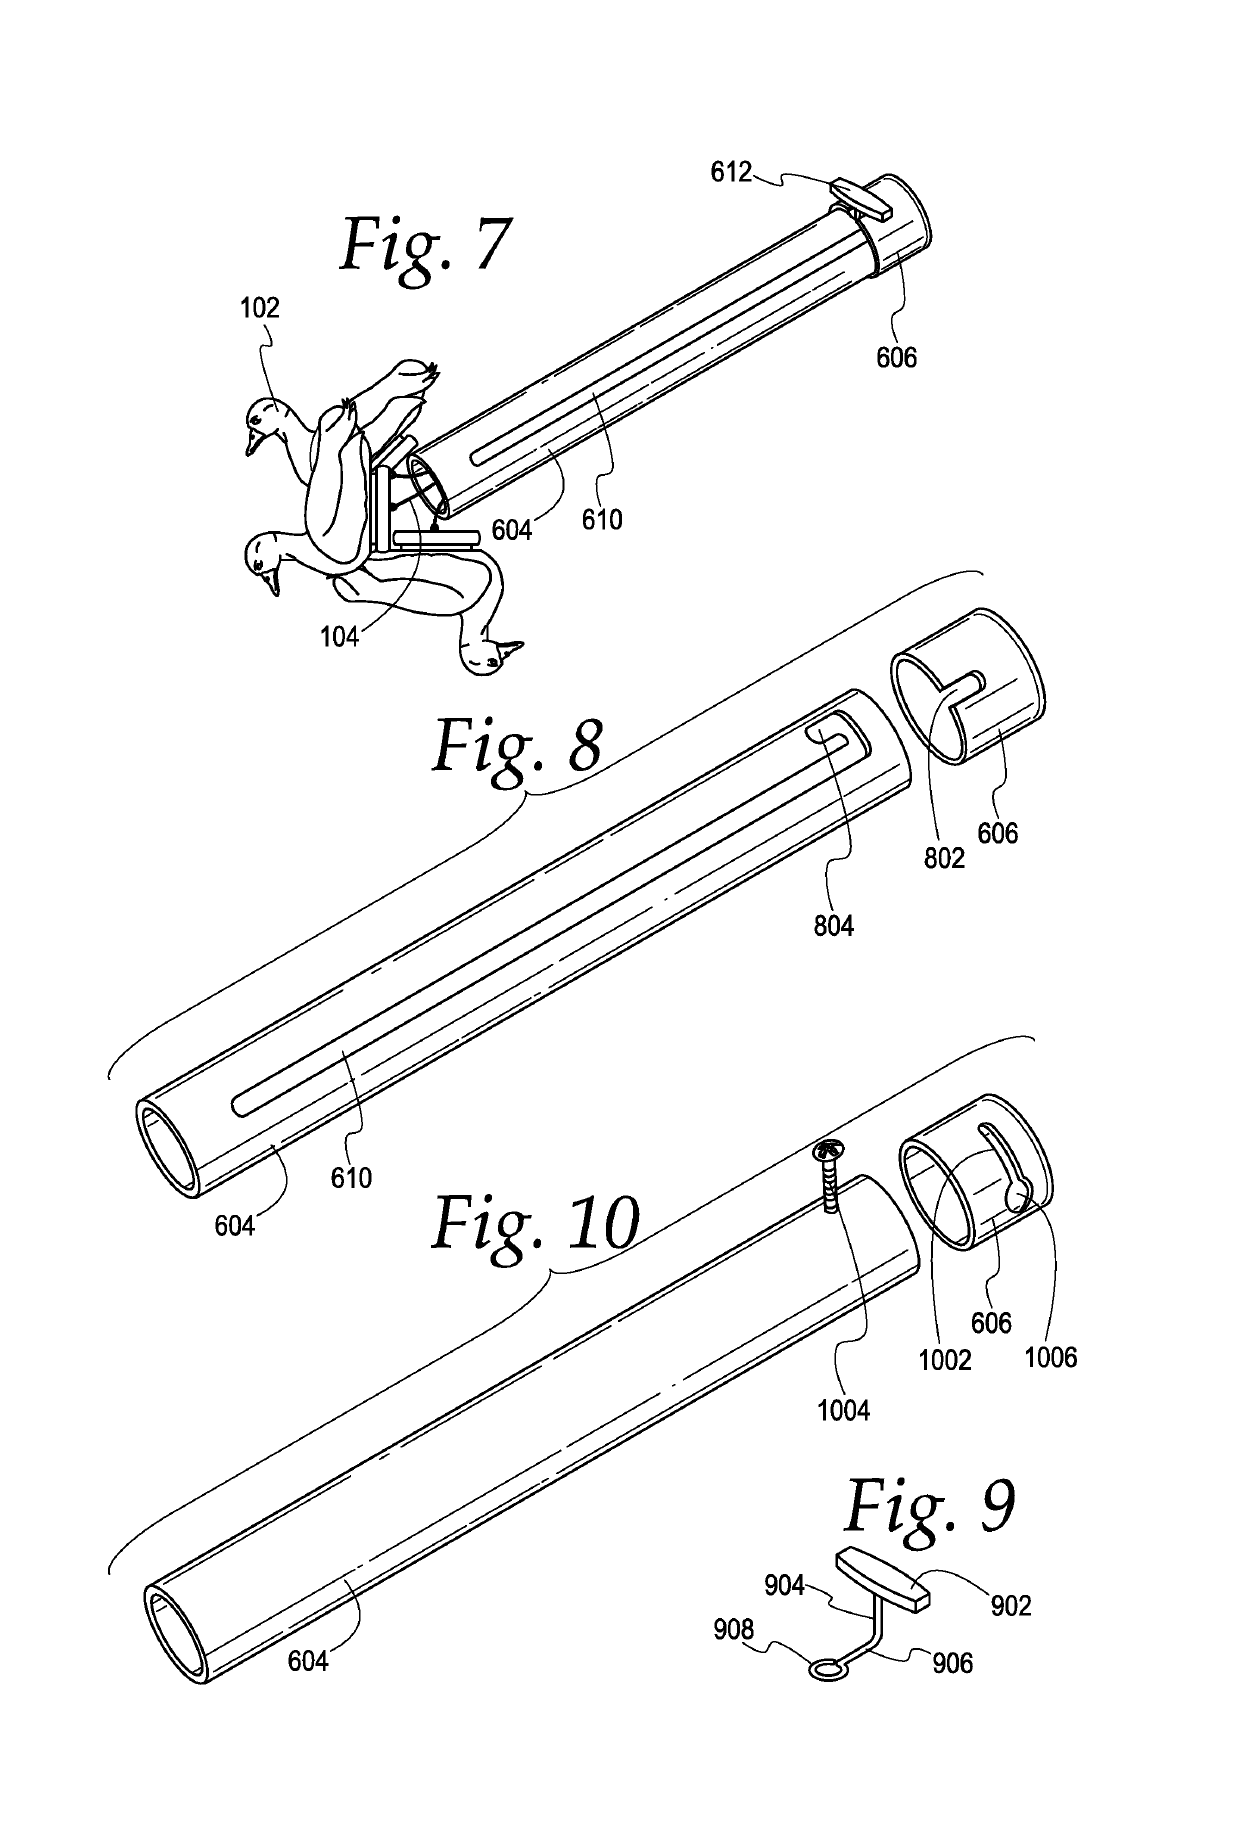 Apparatus for organizing cord attached devices